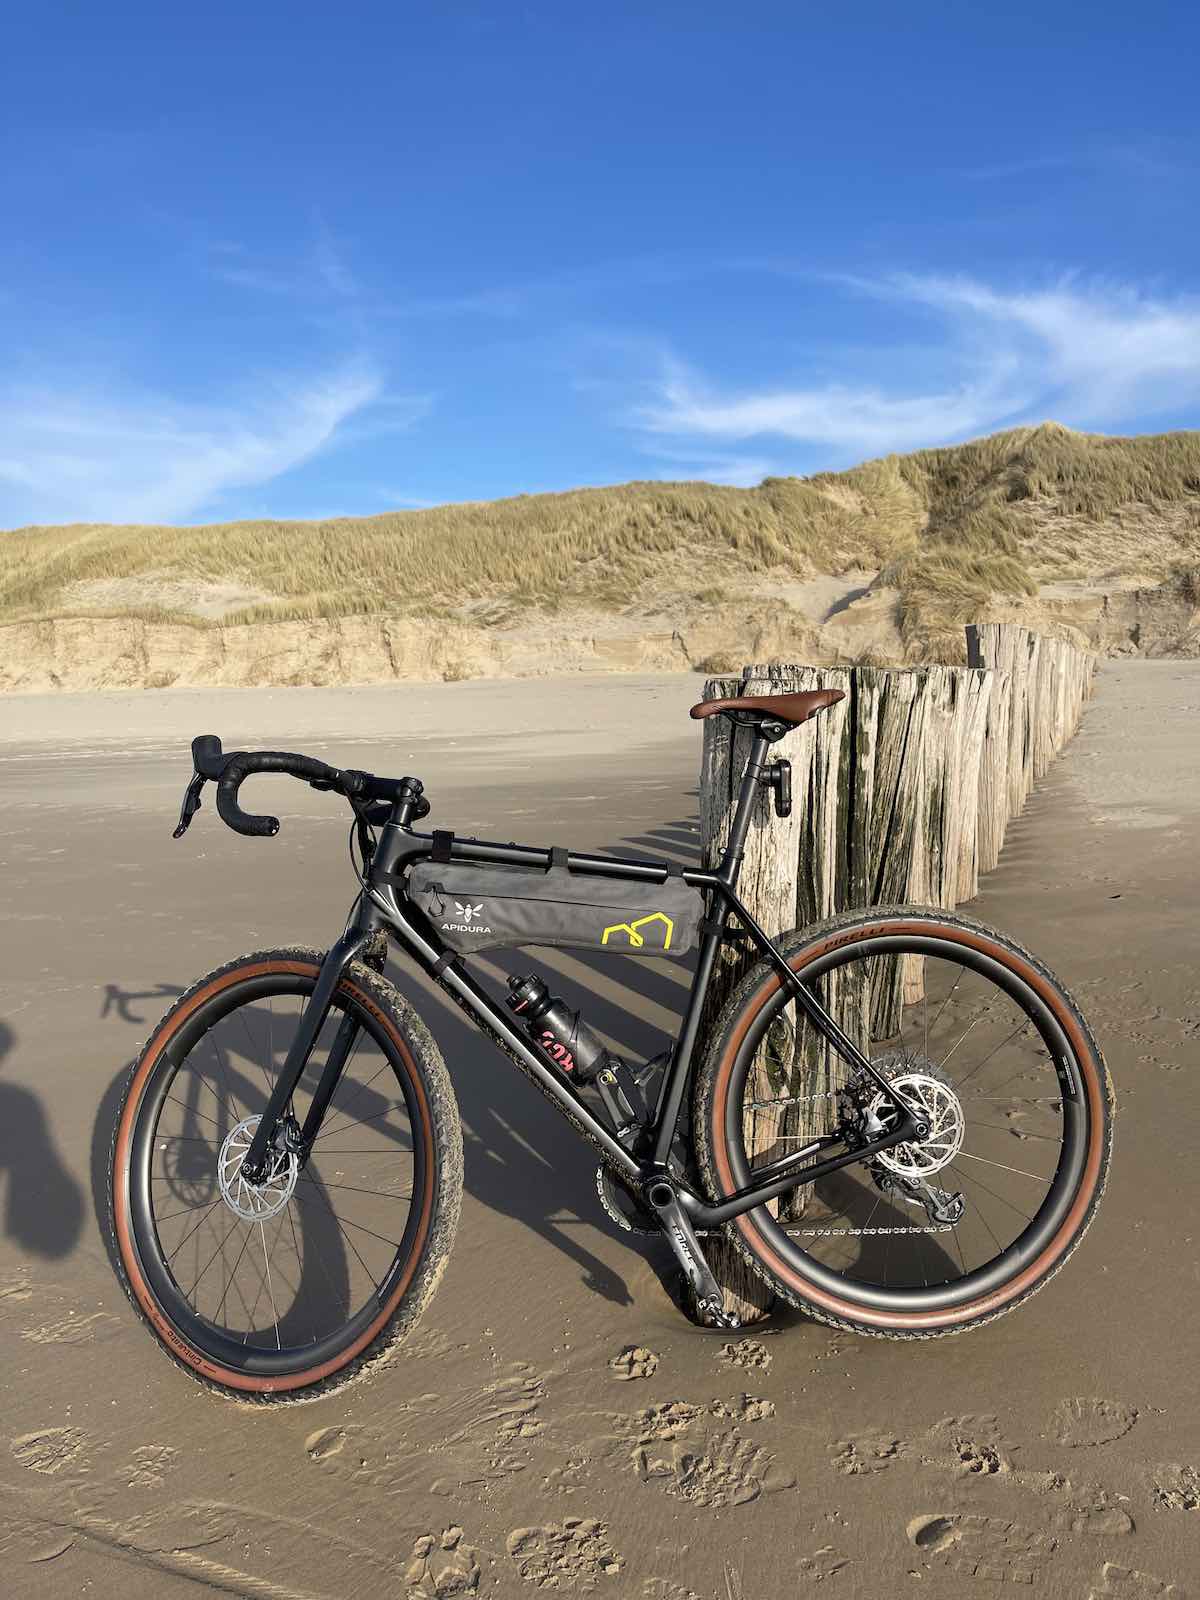 bikerumor pic of the day a bicycle leans against short wood pilings on a beach, grass covered dunes are in the background and there a a few whispy clouds in the bright blue sky.